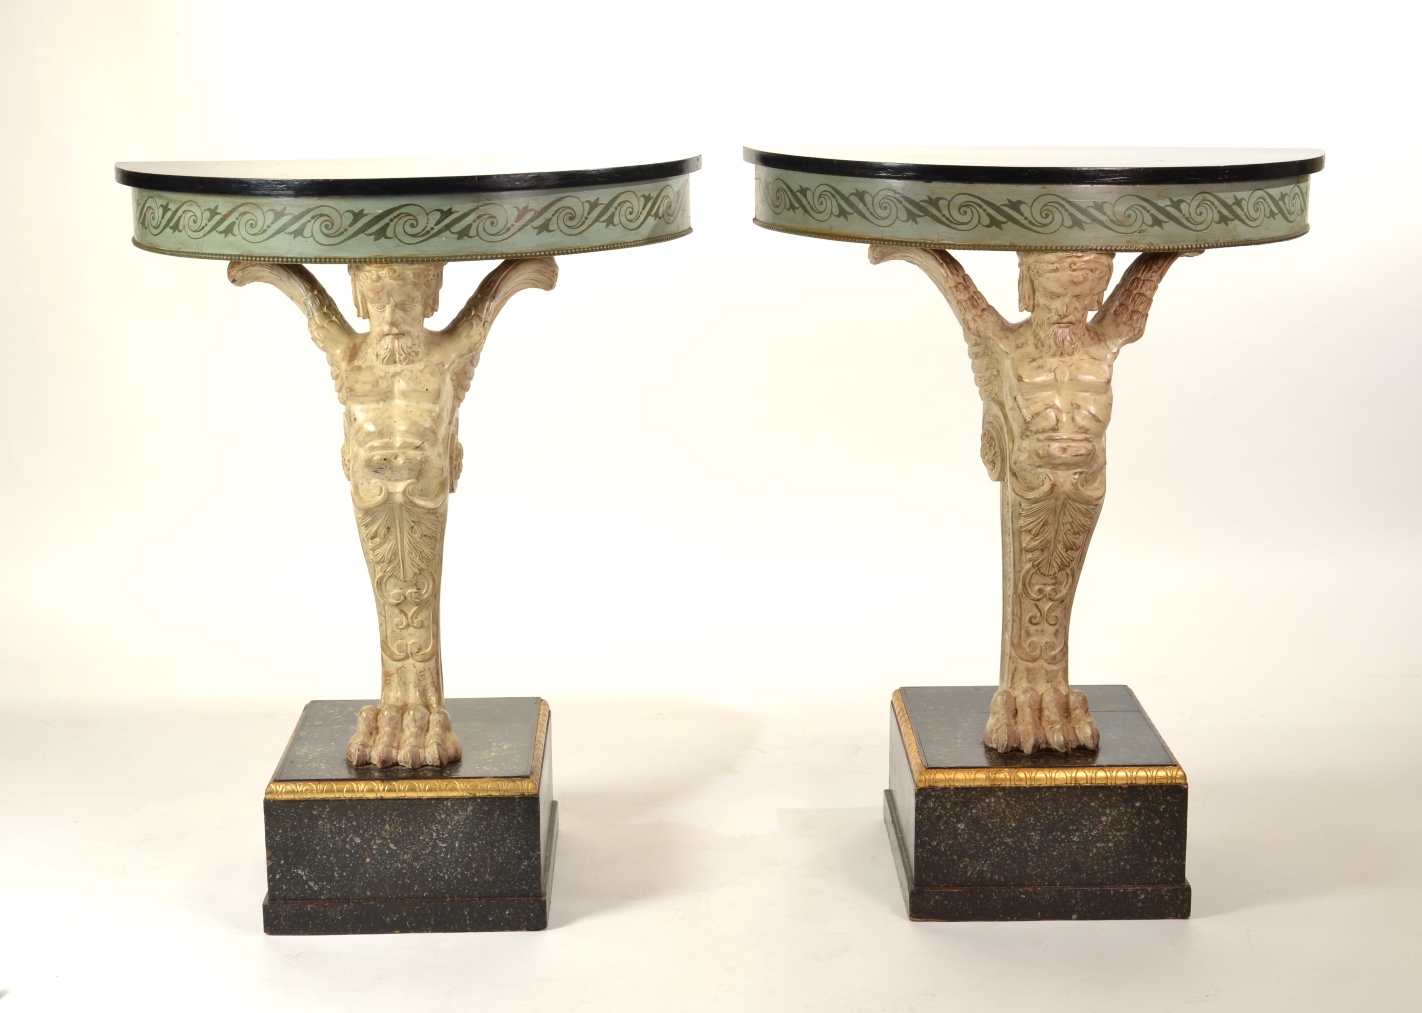 Pair of Carved and Painted Demilune Console Tables, 20th c.